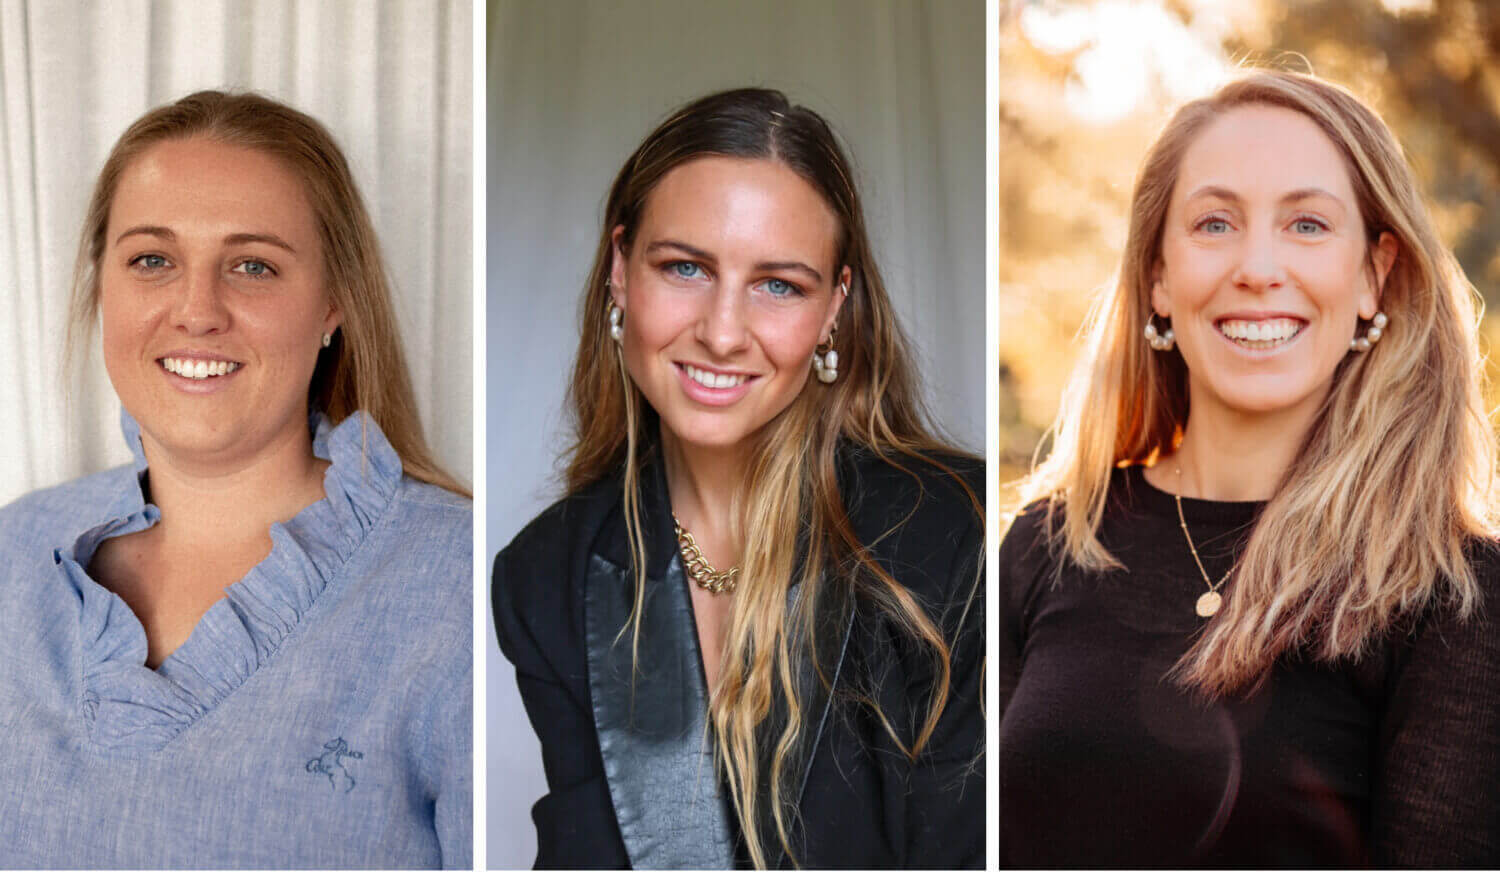 Condobolin’s Emily Sinderberry, EJS Business Services, Gabby Neal and Samantha Munro, INTACT will be presenting at the 2023 Thriving Women Conference, which will be held in Wagga Wagga from 13 to 15 August. Image Contributed.